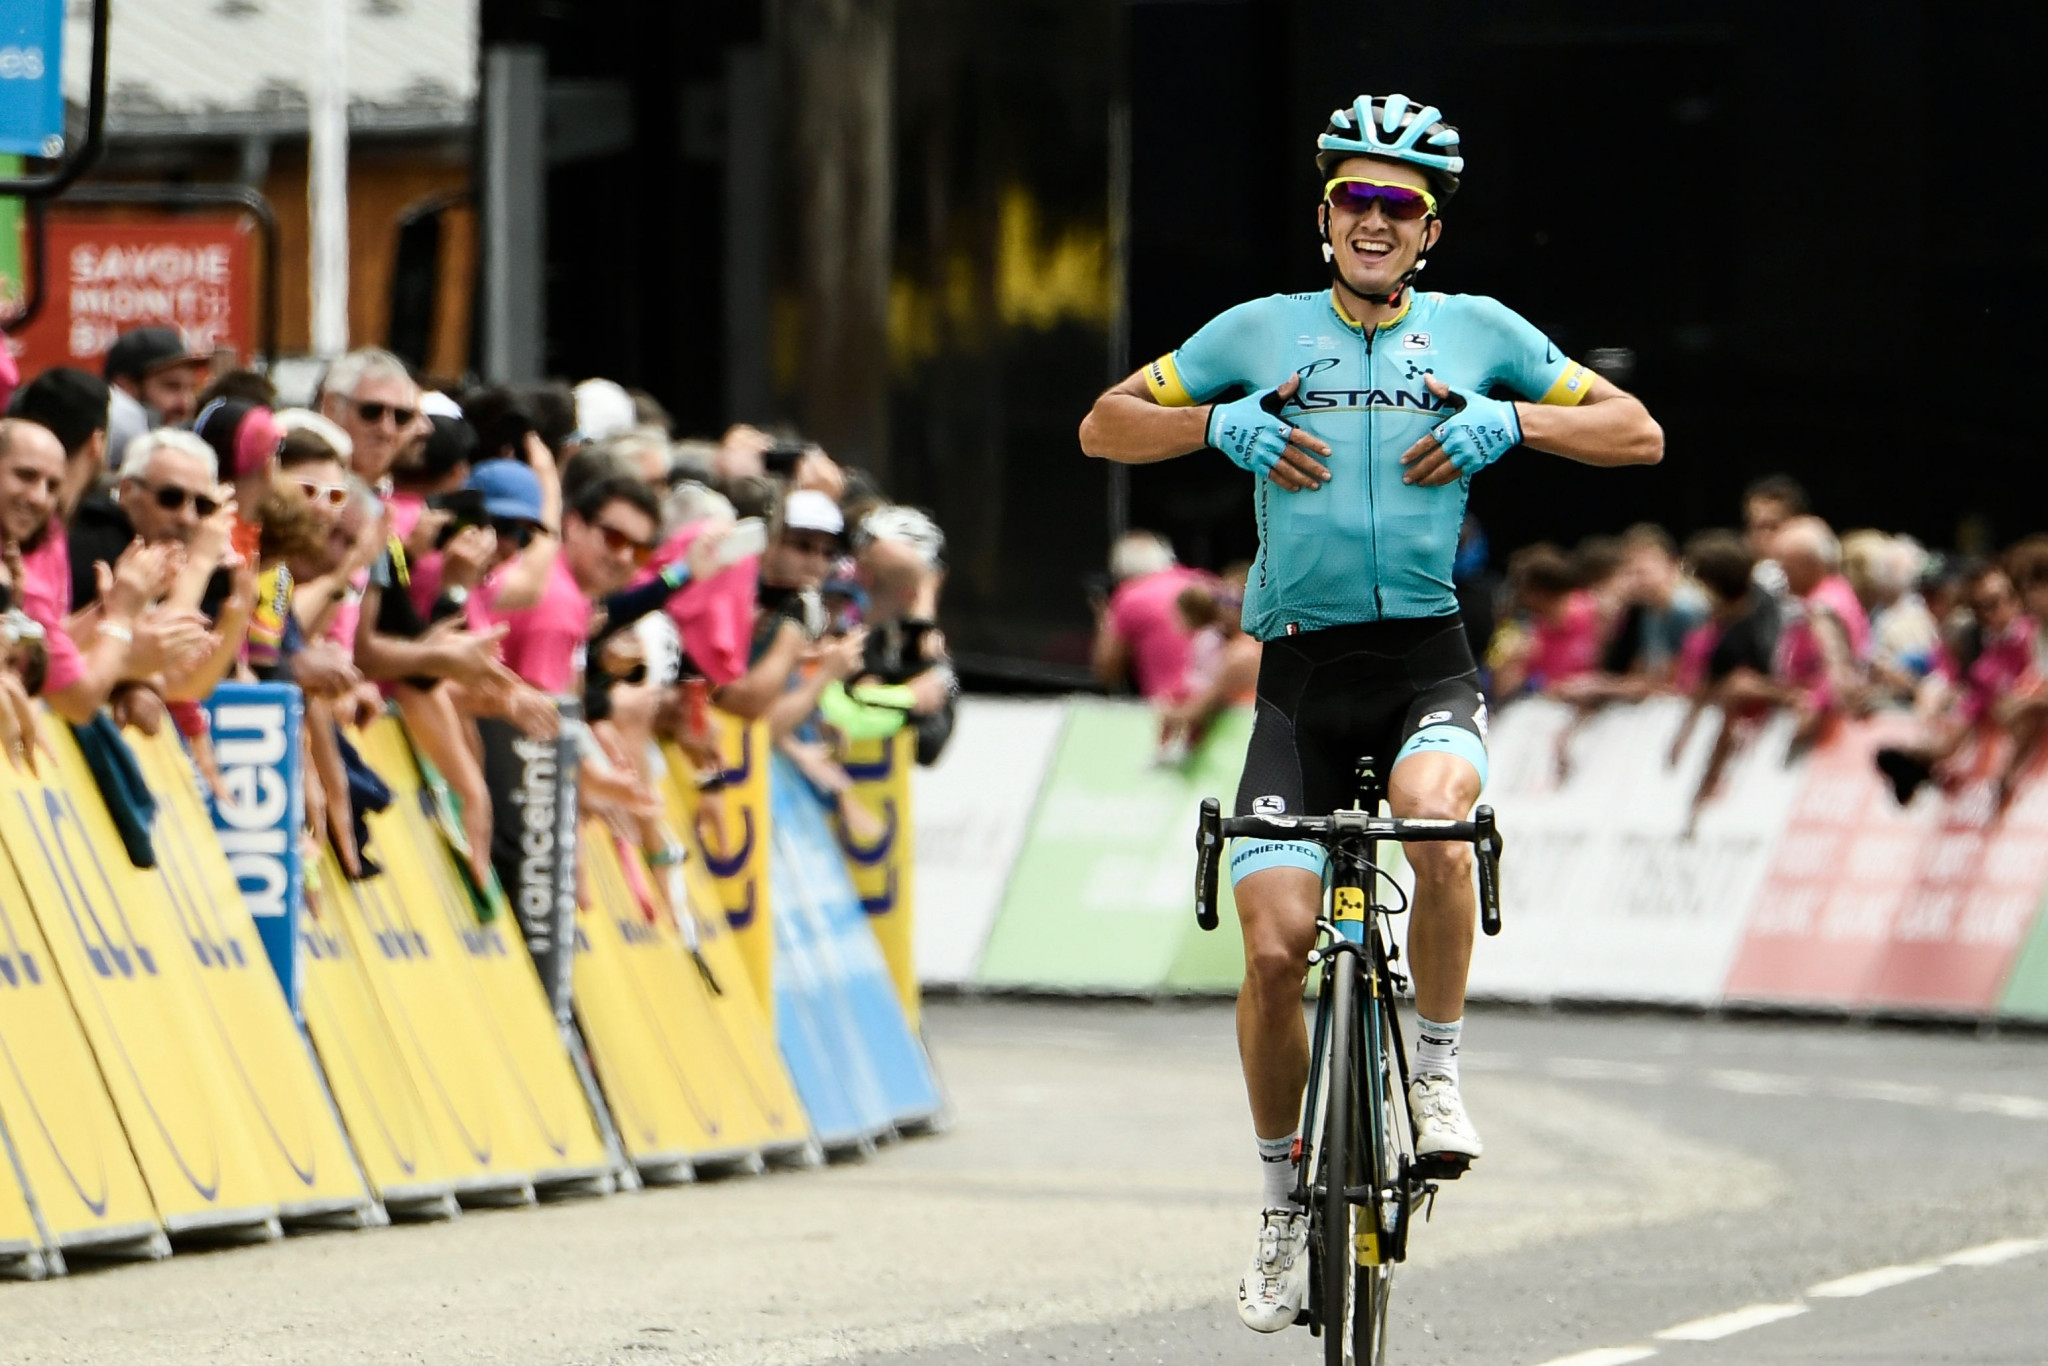 Bilbao takes Critérium du Dauphiné stage win as Thomas closes on overall crown